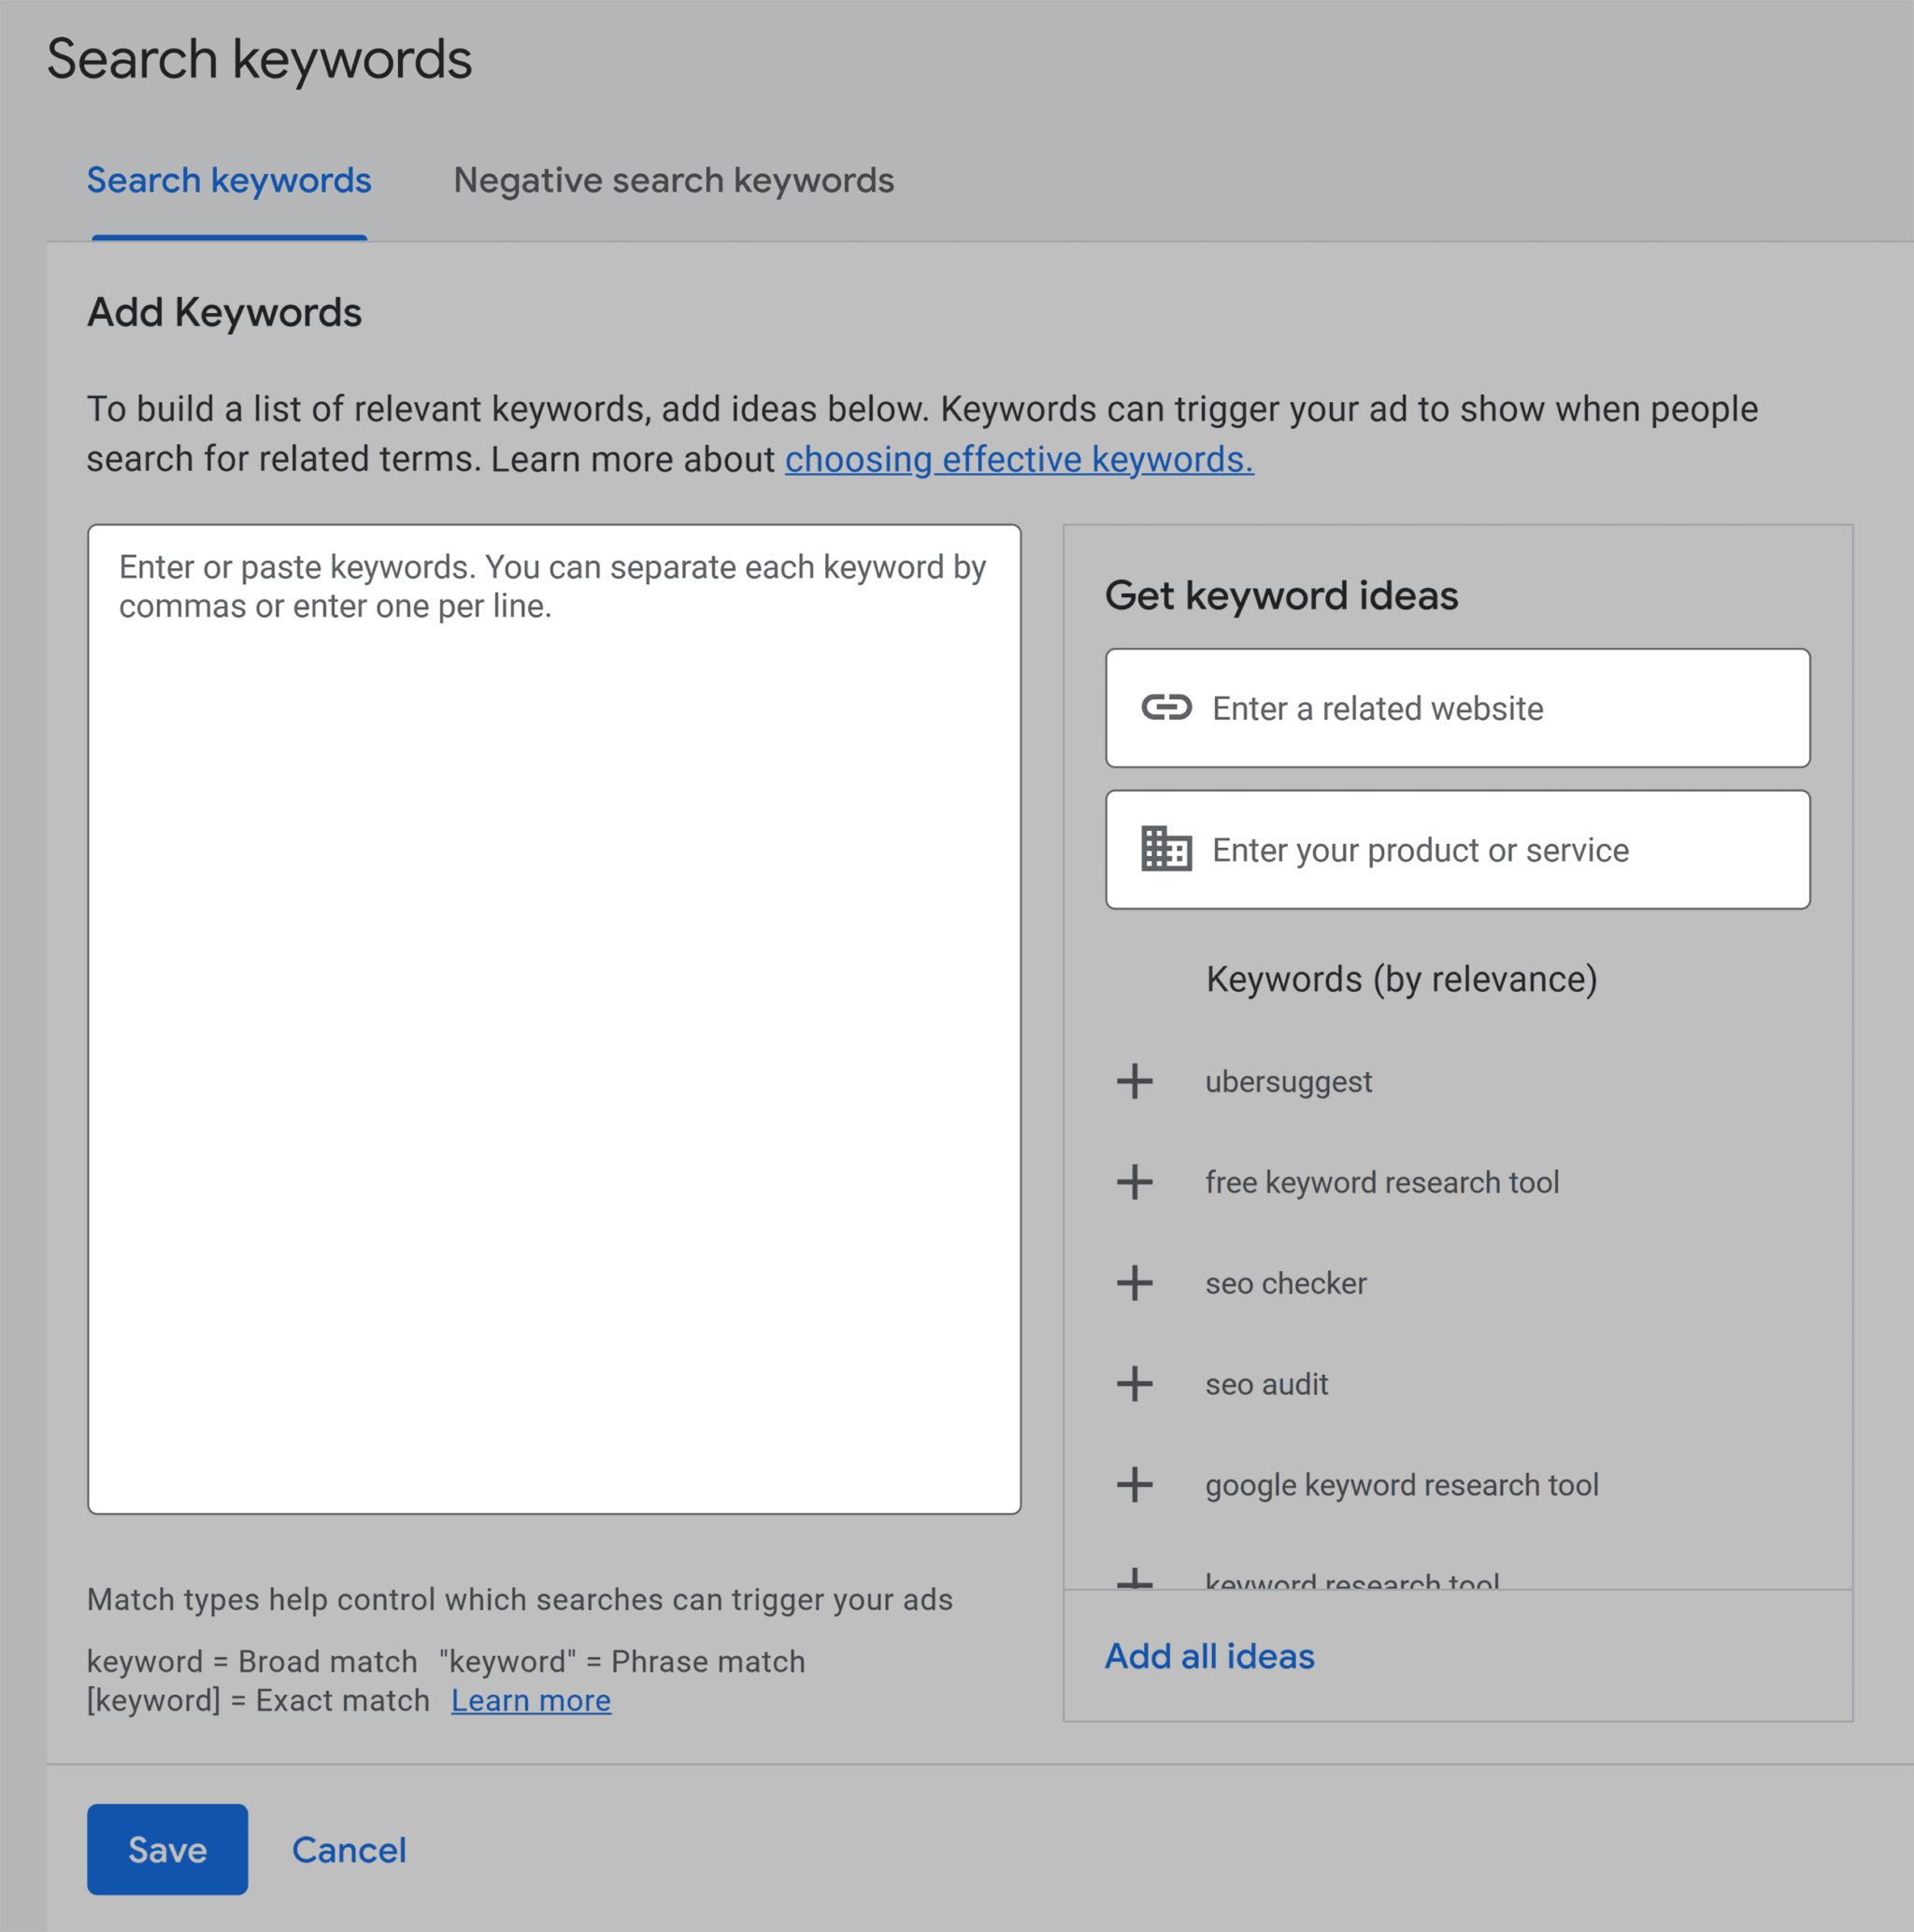 search-keywords-add-keywords How to Use Keyword Match Types in Google Ads